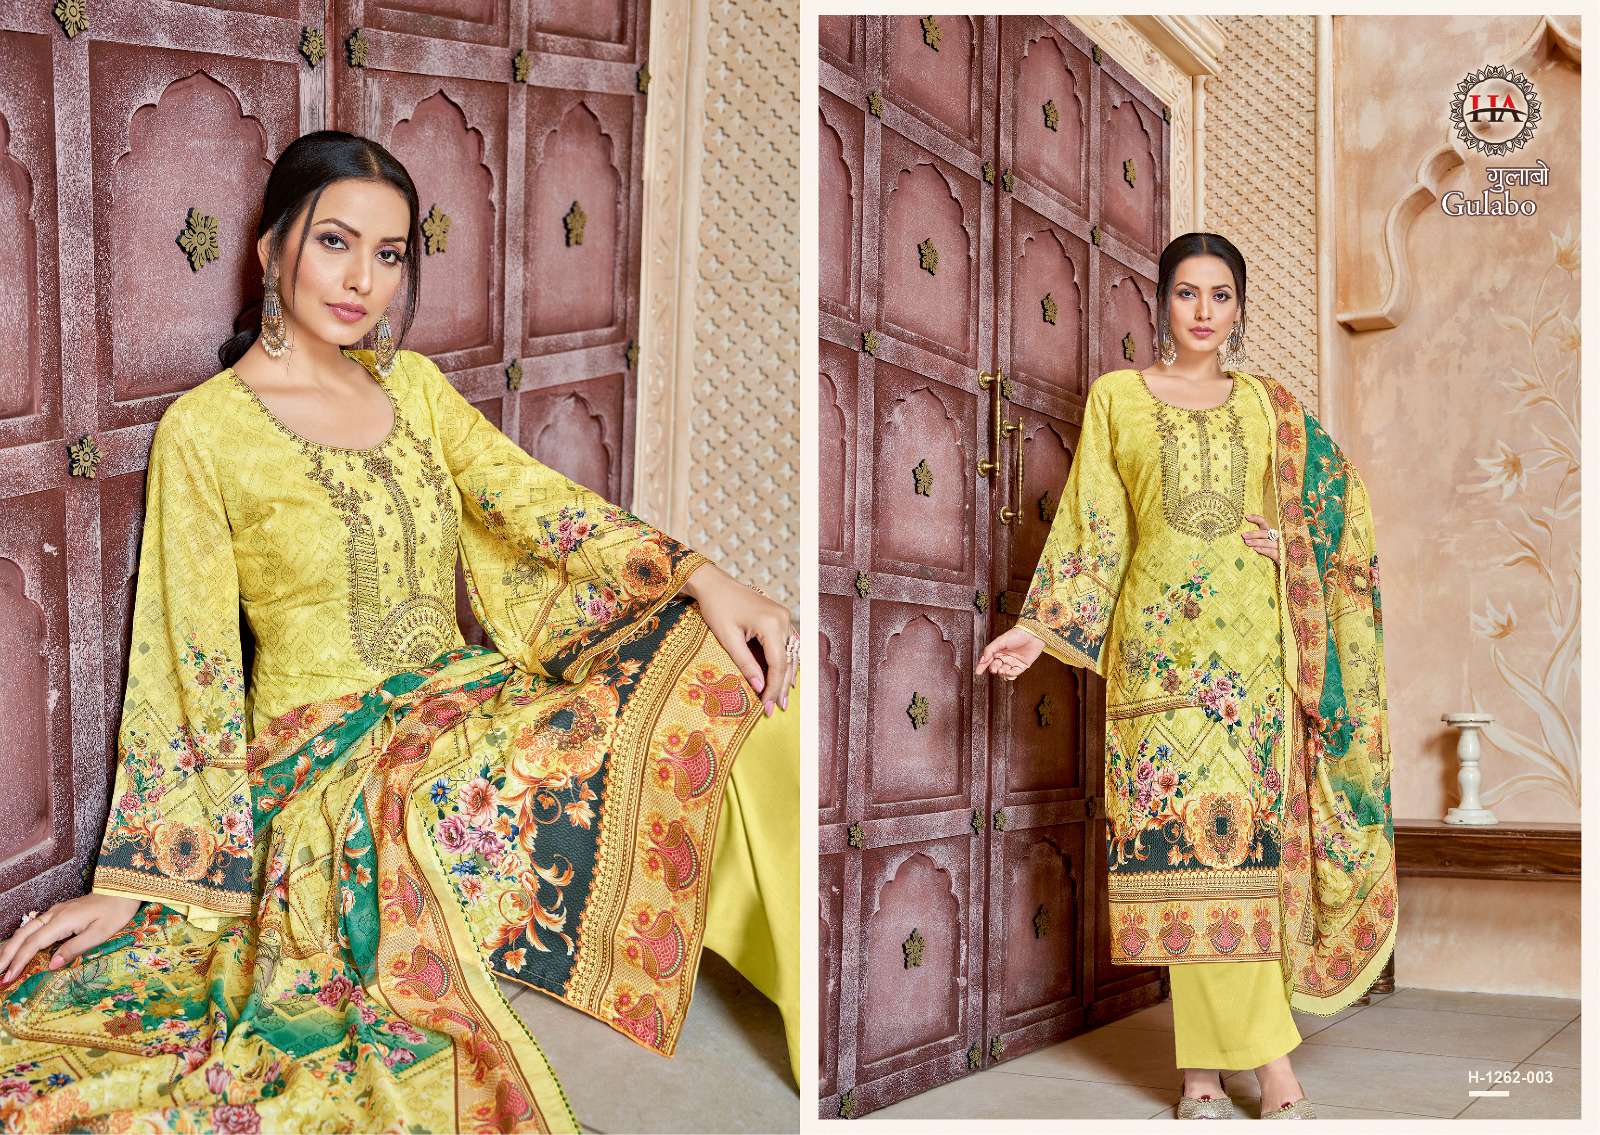 Gulabo By Harshit Fashion Hub 1262-001 To 1262-008 Series Beautiful Stylish Festive Suits Fancy Colorful Casual Wear & Ethnic Wear & Ready To Wear Pure Soft Cotton With Embroidery Dresses At Wholesale Price